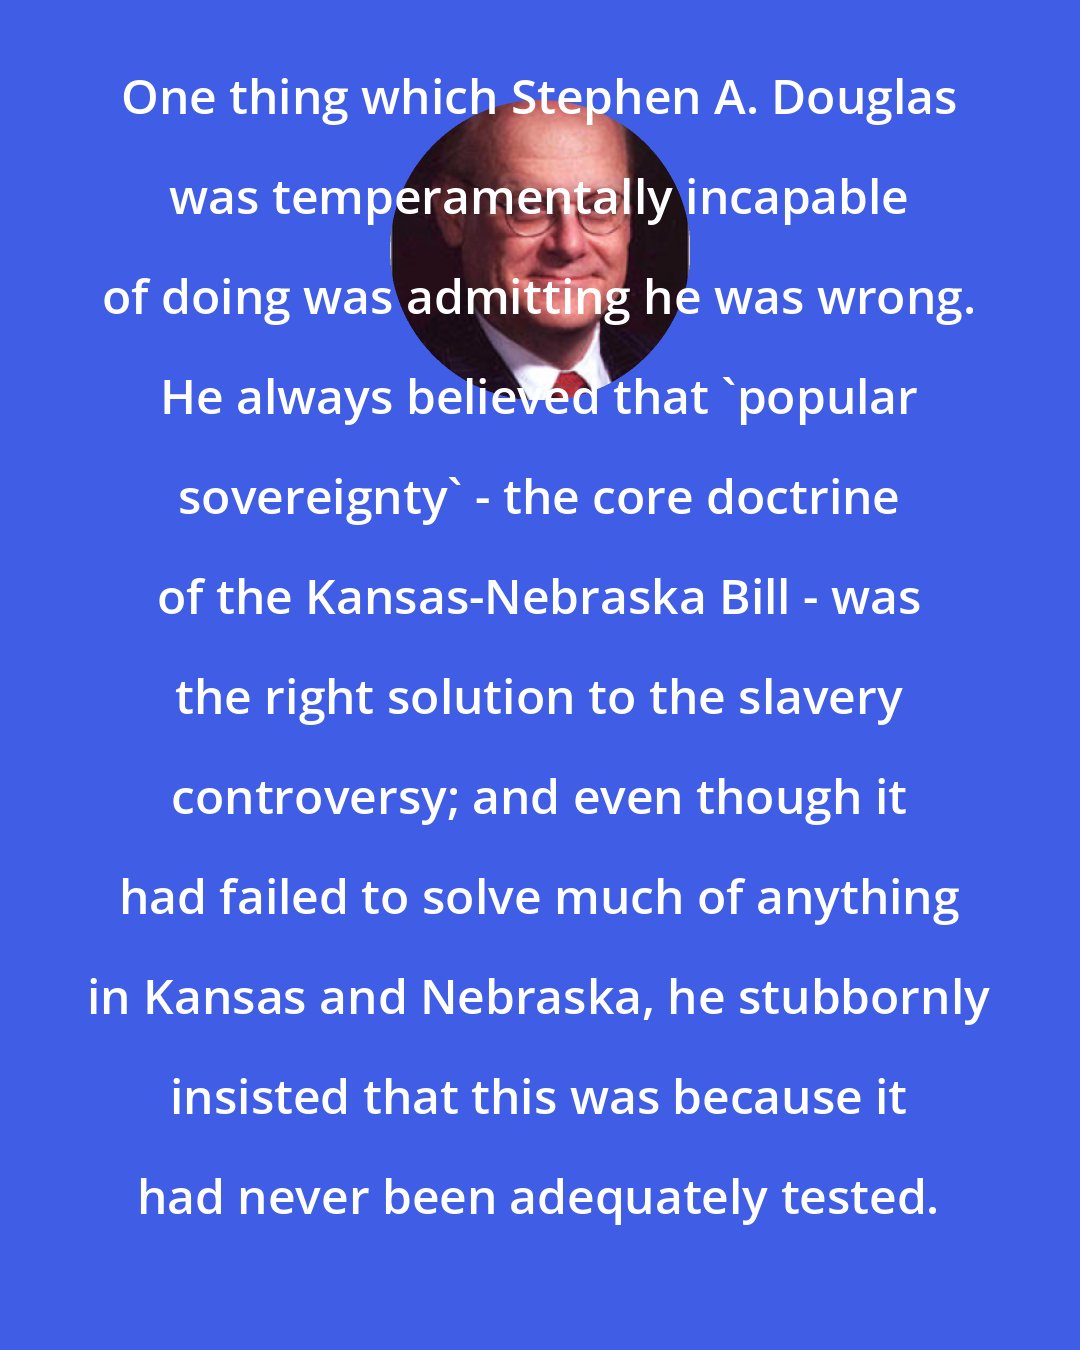 Allen C. Guelzo: One thing which Stephen A. Douglas was temperamentally incapable of doing was admitting he was wrong. He always believed that 'popular sovereignty' - the core doctrine of the Kansas-Nebraska Bill - was the right solution to the slavery controversy; and even though it had failed to solve much of anything in Kansas and Nebraska, he stubbornly insisted that this was because it had never been adequately tested.